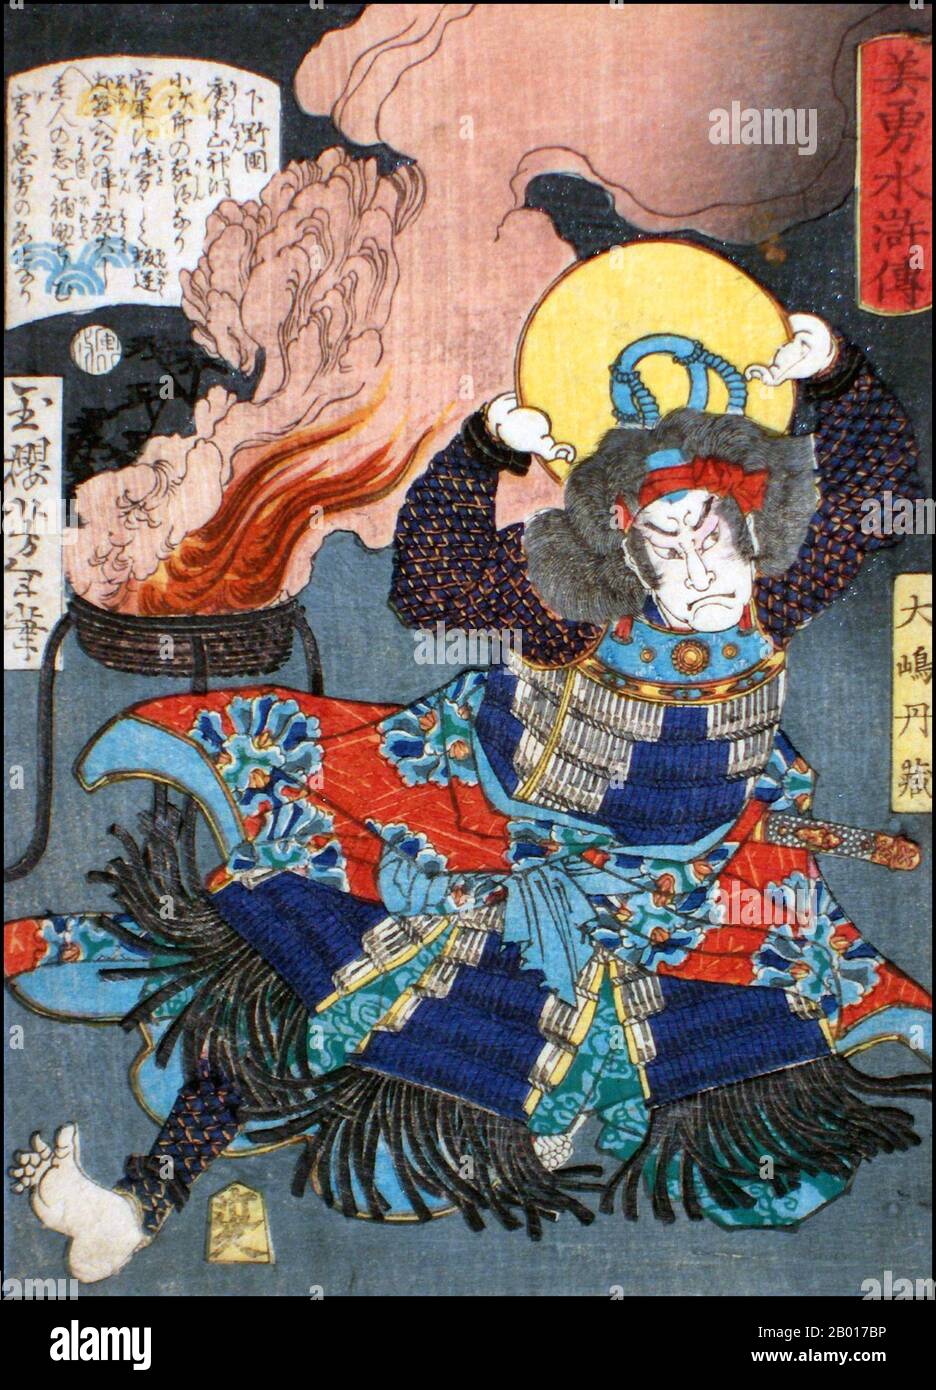 Japan: 'The Bandit Chieftain Oshima Tanzo'. Ukiyo-e woodblock print from the series 'Heroes of the Water Margin' by Tsukioka Yoshitoshi (1839 - 9 June 1892), 1866.  Tsukioka Yoshitoshi, also named Taiso Yoshitoshi, was a Japanese artist. He is widely recognized as the last great master of Ukiyo-e, a type of Japanese woodblock printing. He is additionally regarded as one of the form's greatest innovators. His career spanned two eras – the last years of feudal Japan, and the first years of modern Japan following the Meiji Restoration. Stock Photo